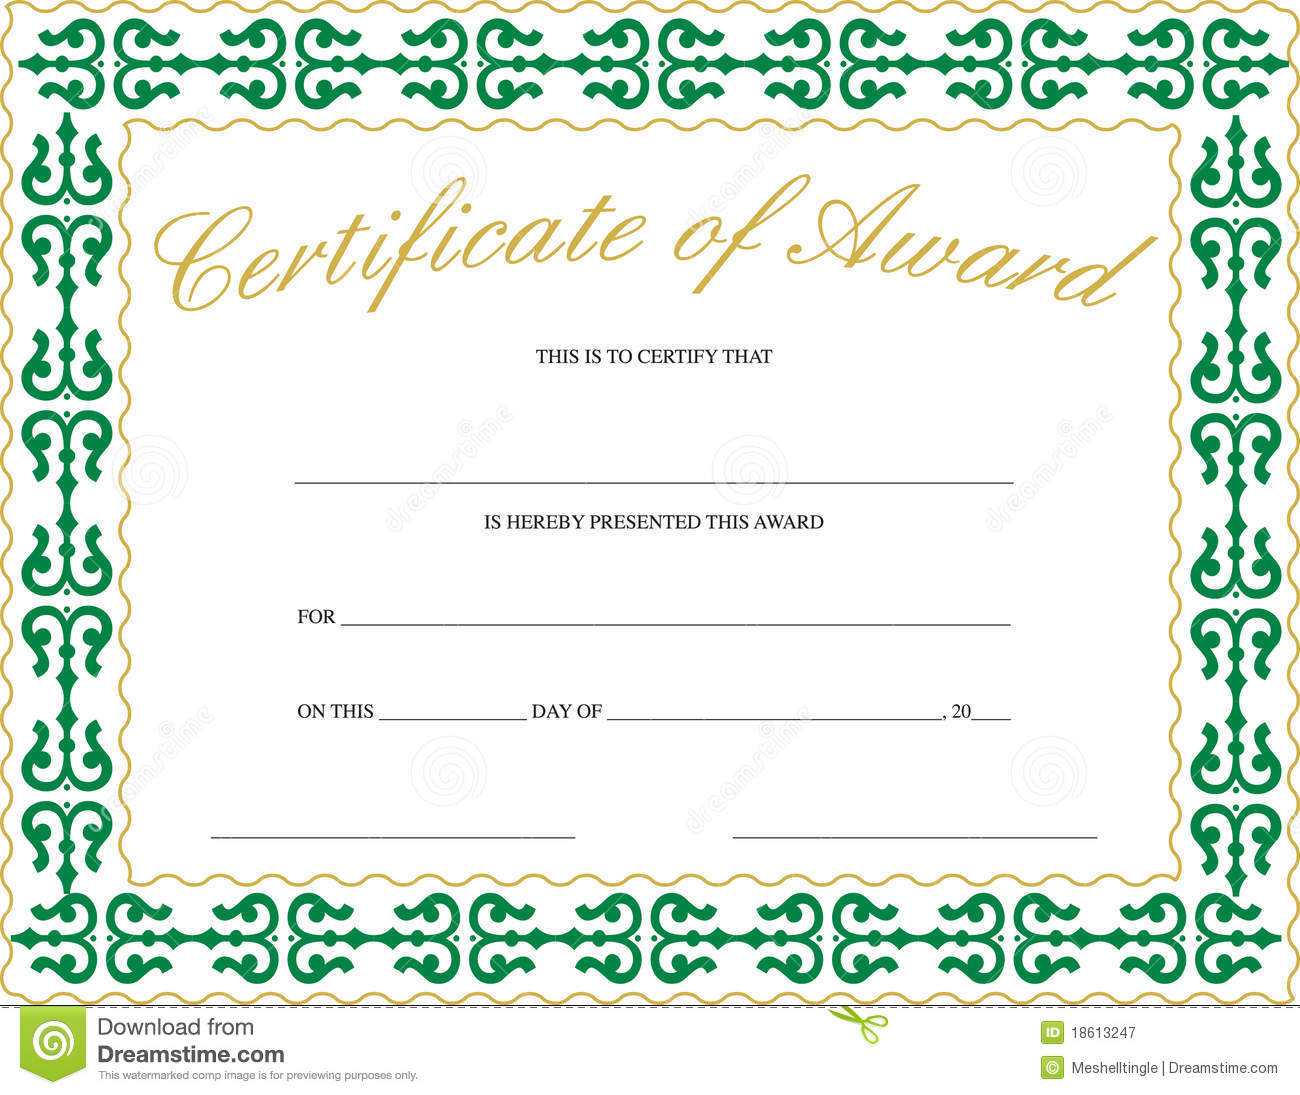 Certificate Of Award Stock Vector. Illustration Of Paper Pertaining To Referral Certificate Template